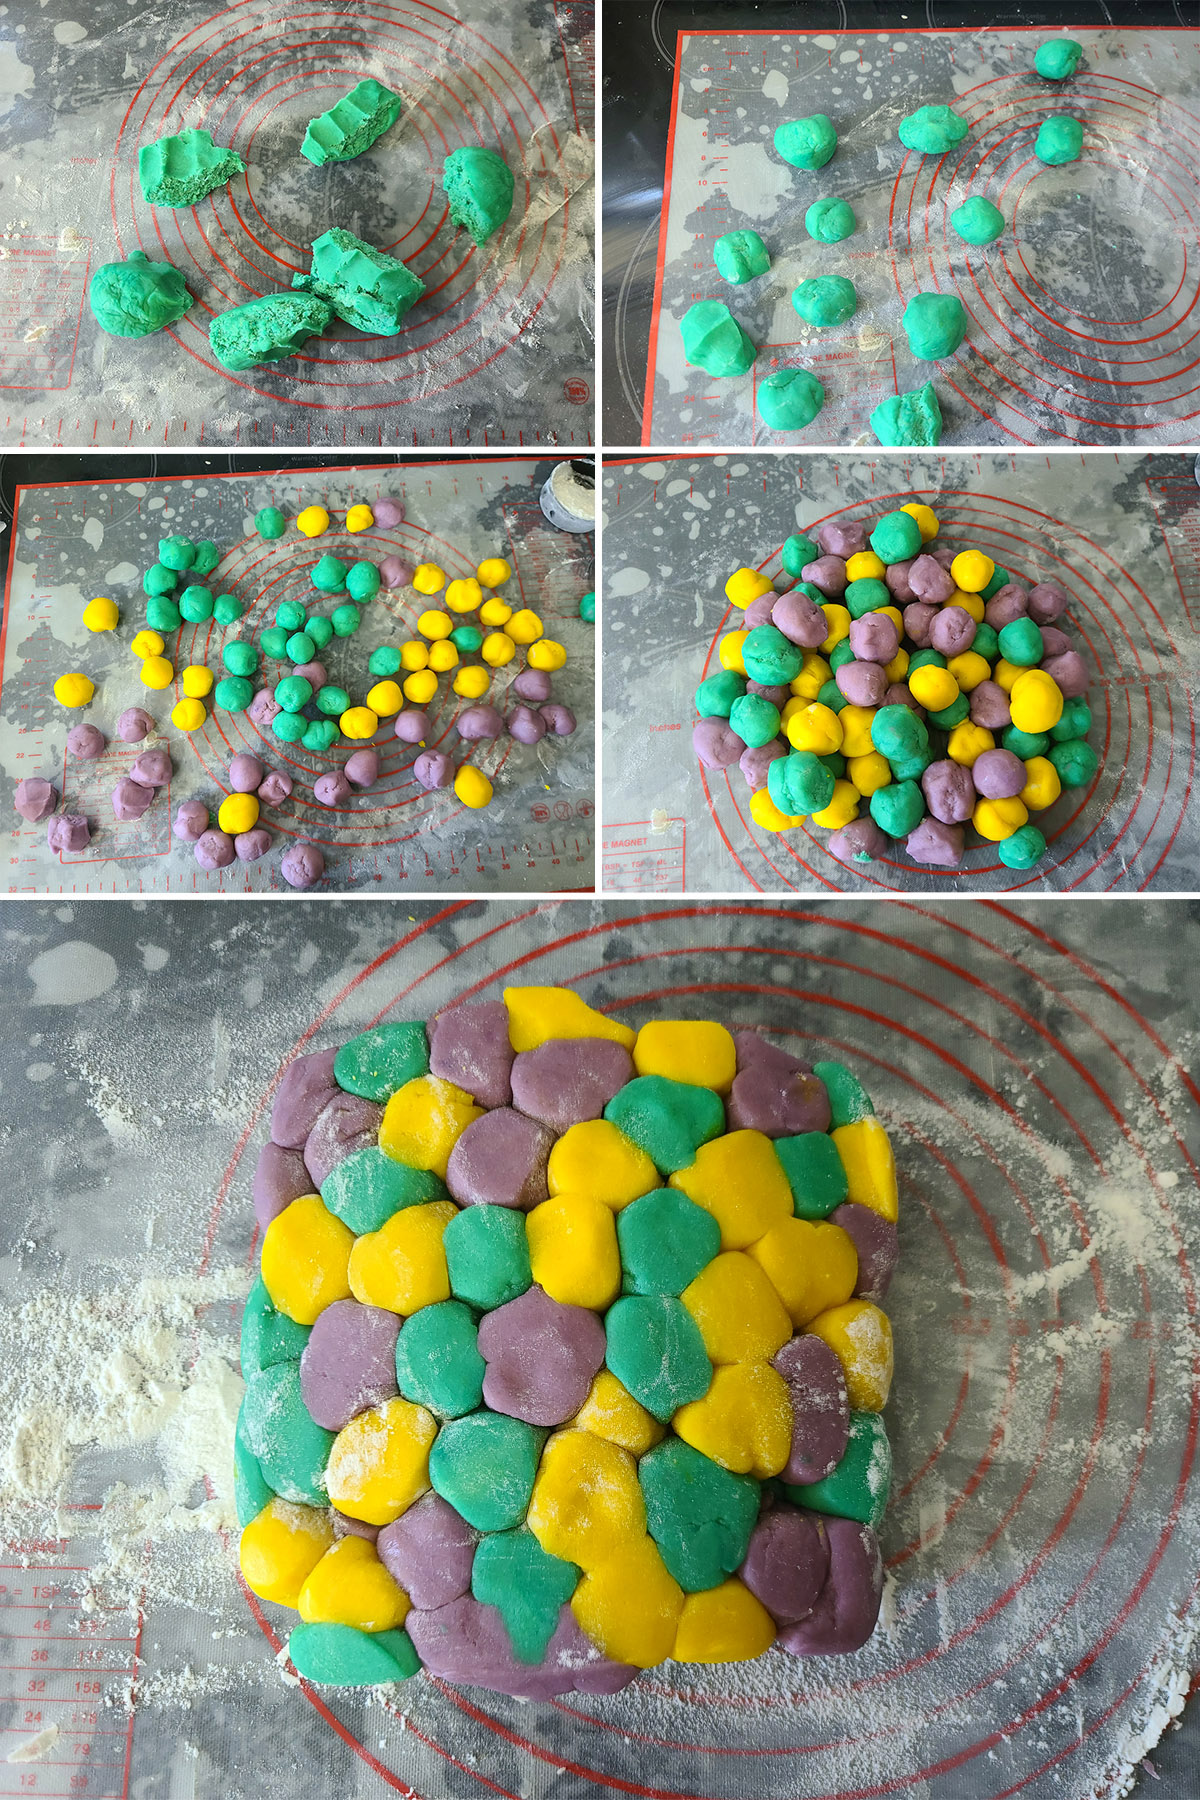 A 5 part image showing the coloured dough being rolled into small balls, mixed together, and gathered in a big lump.